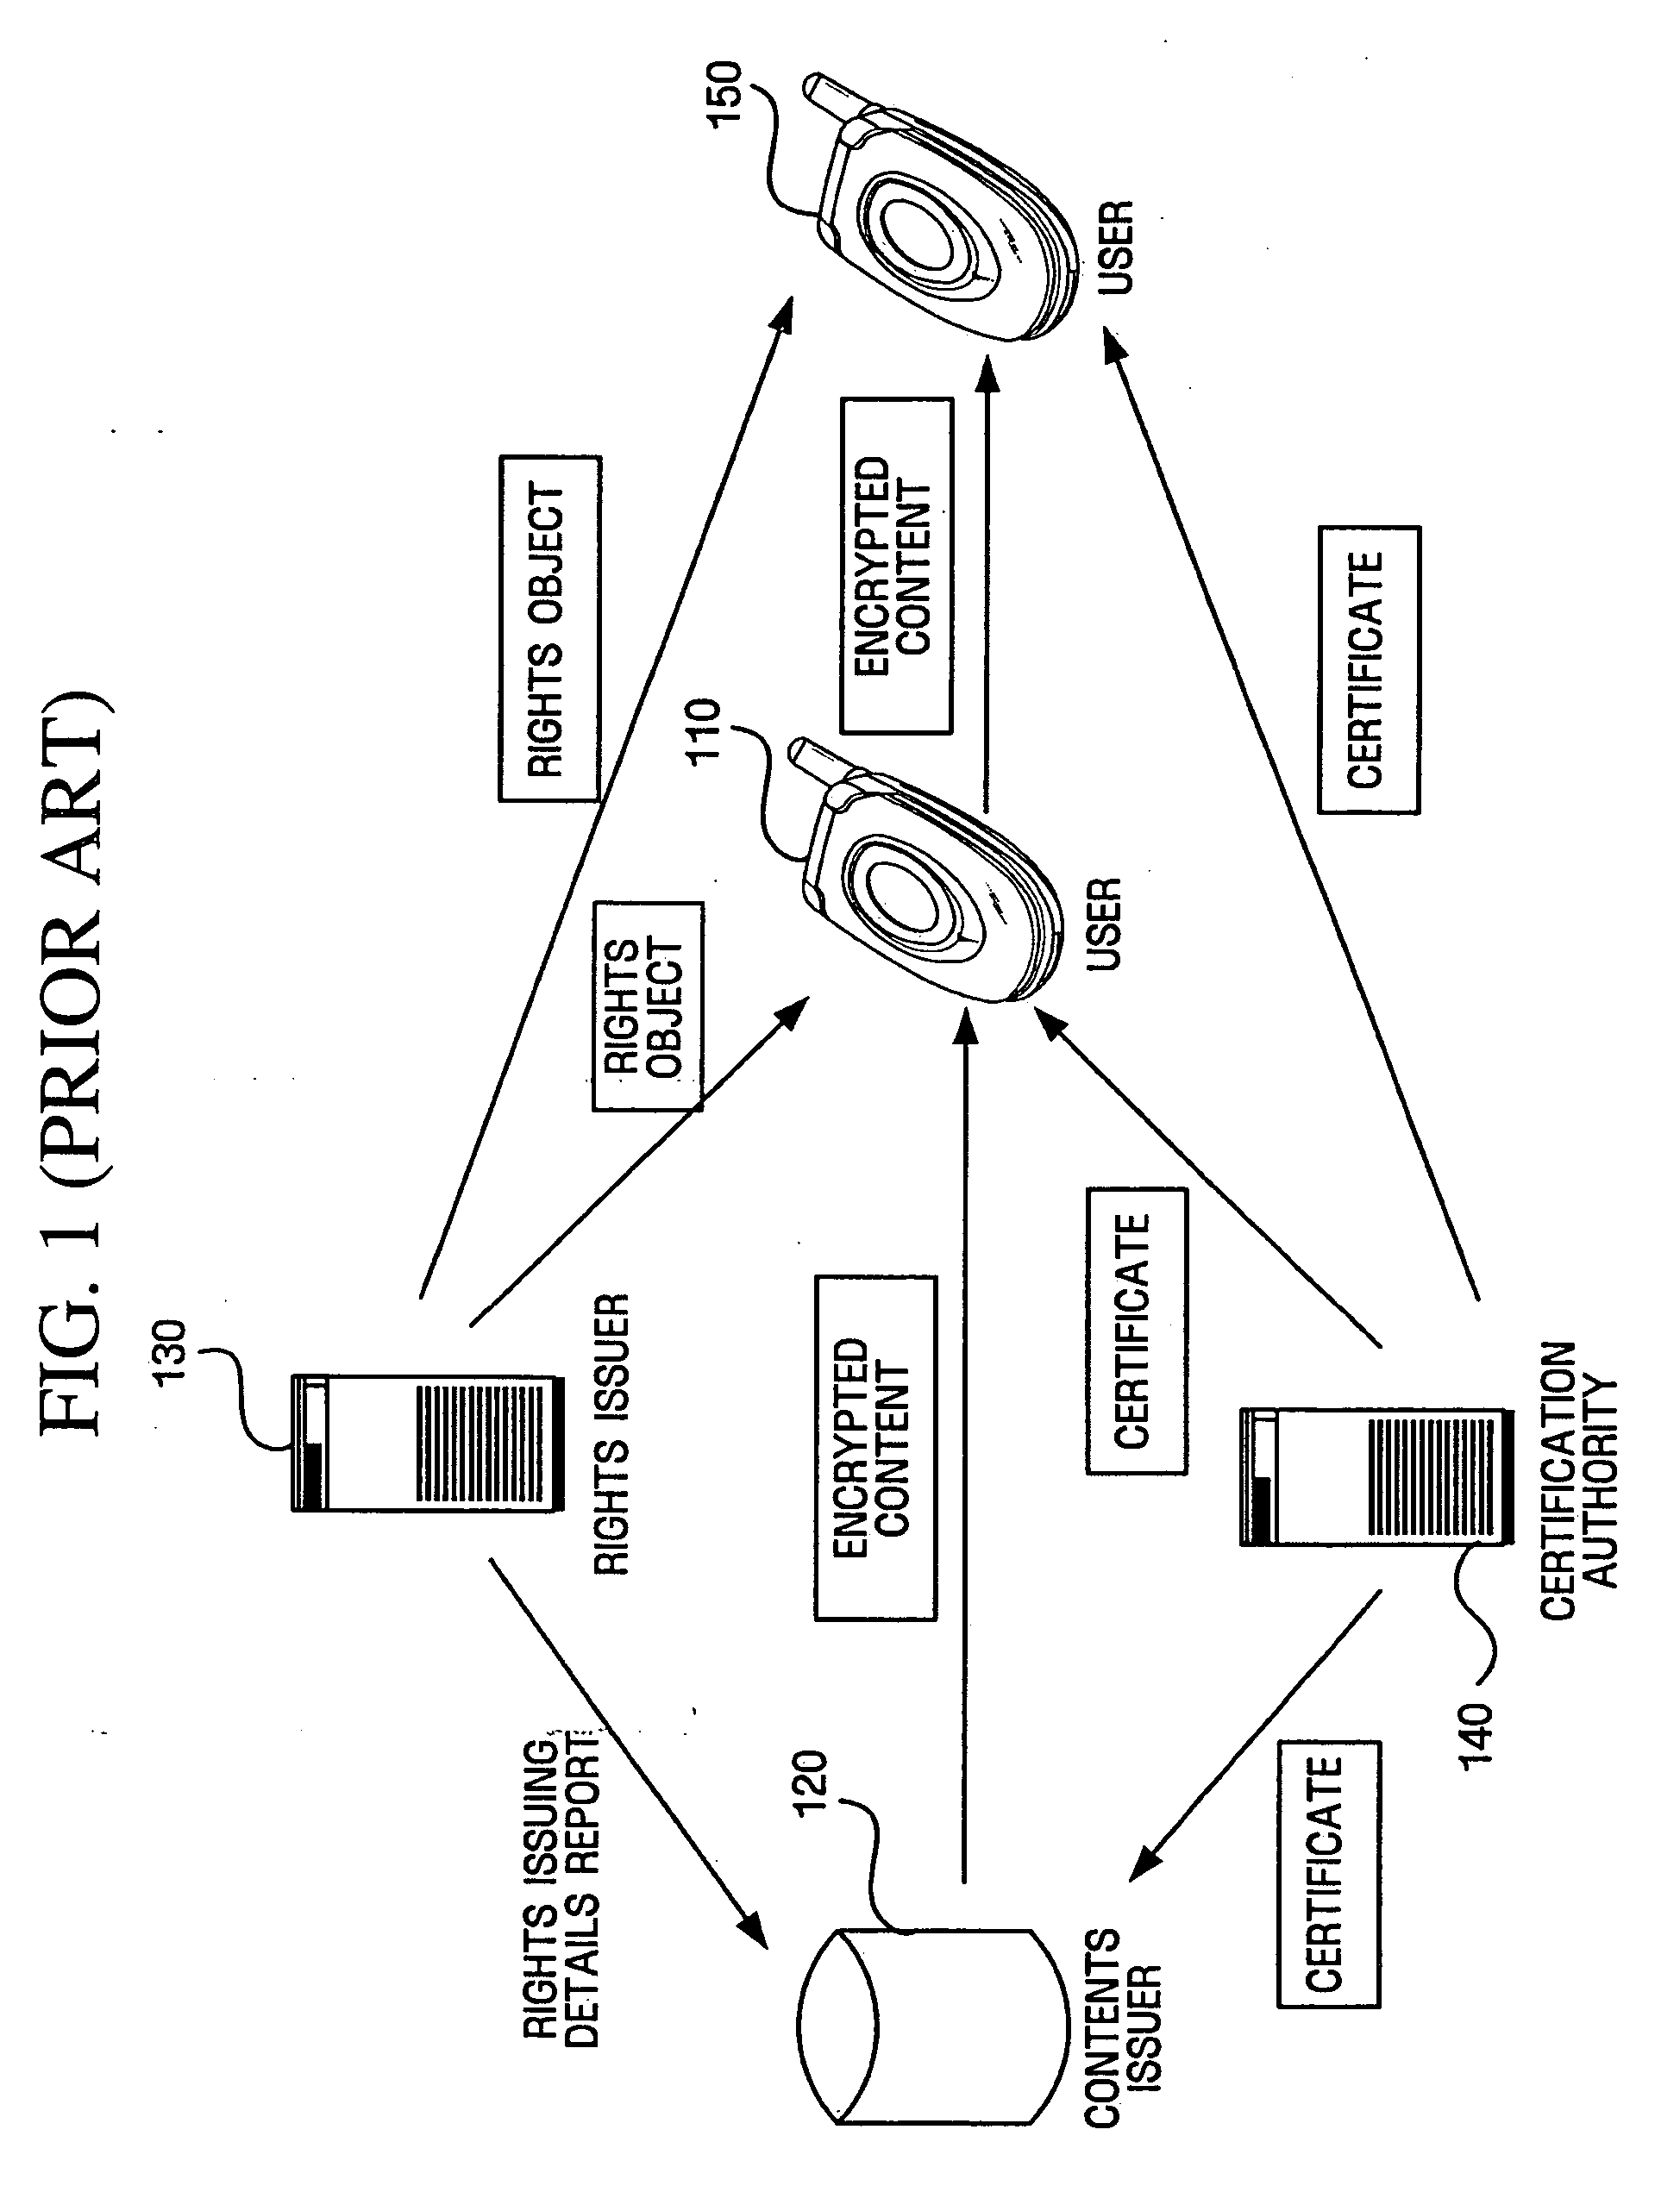 Authentication between device and portable storage